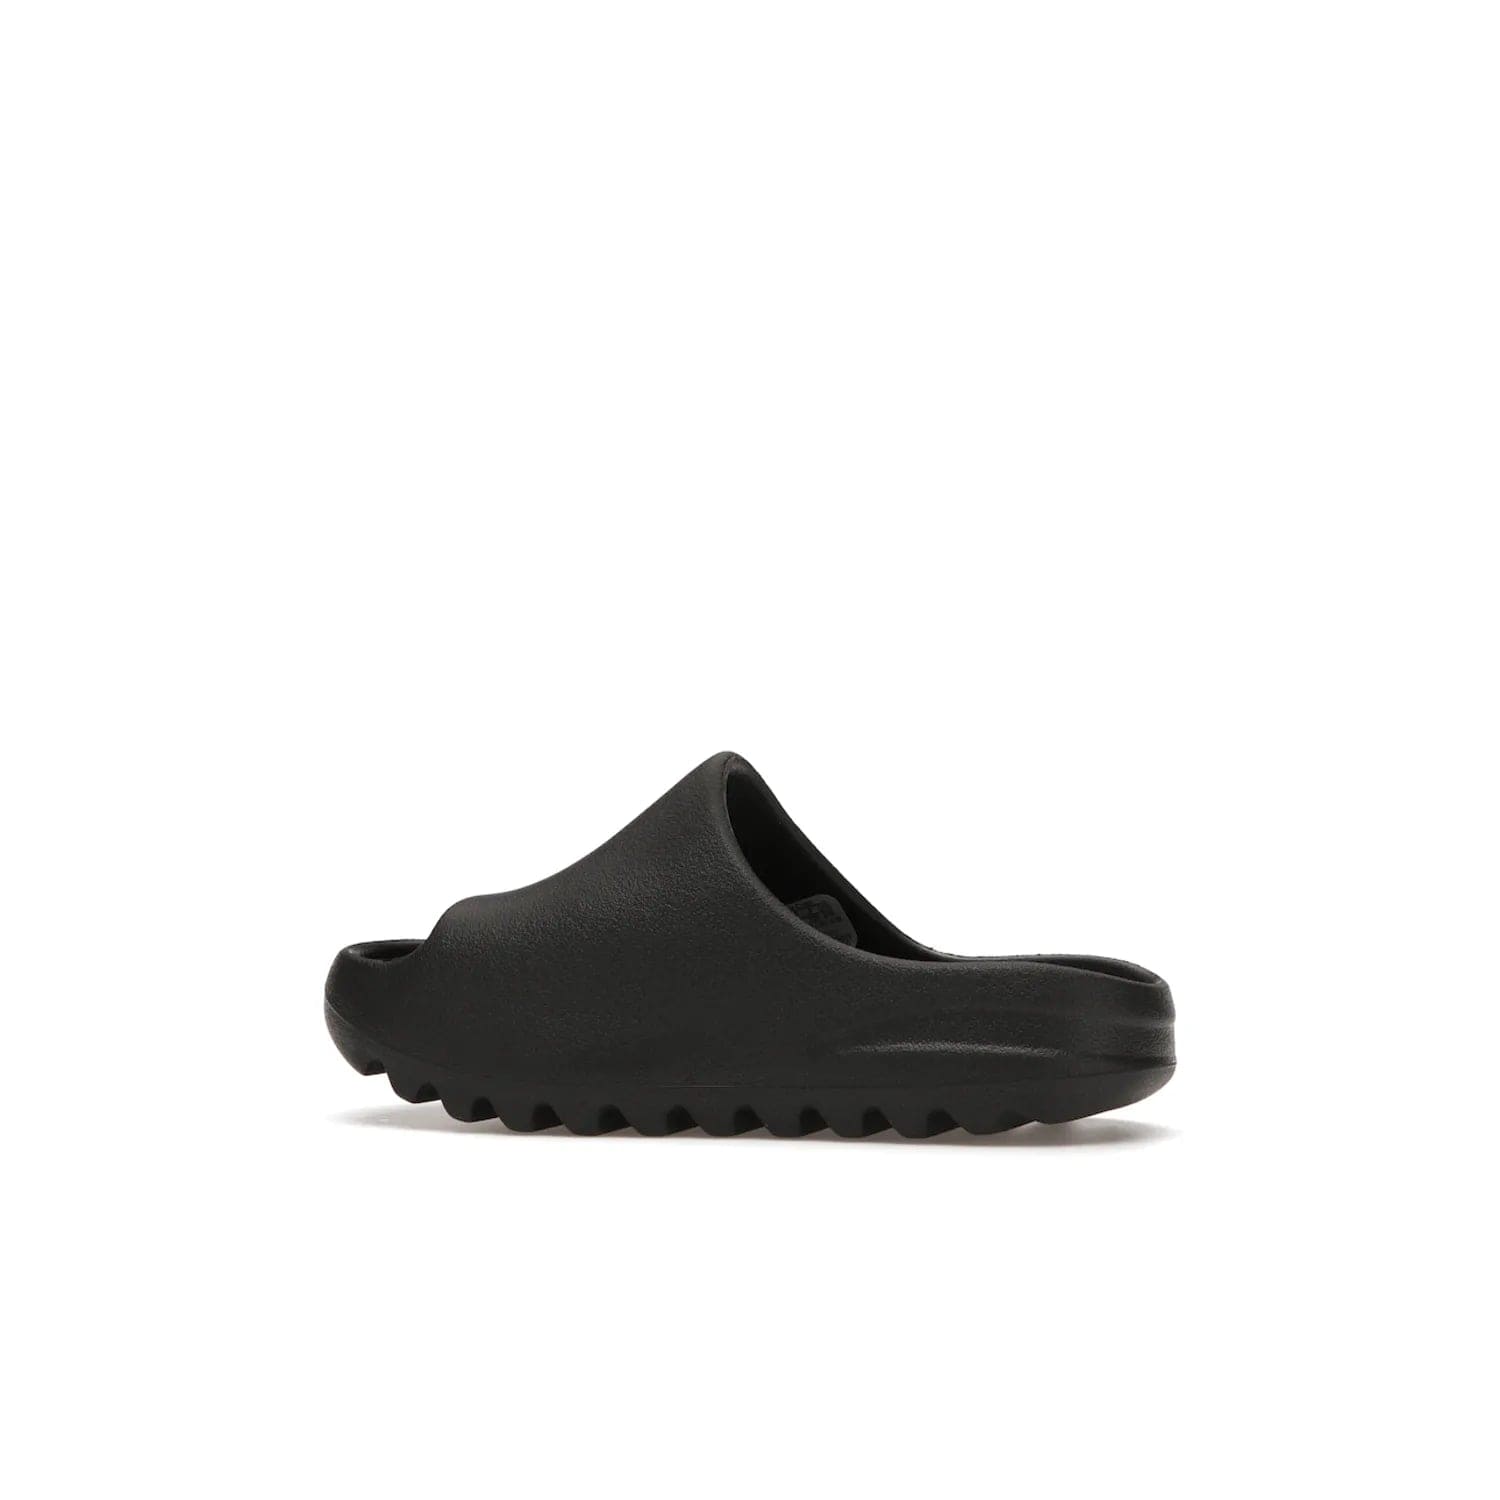 adidas Yeezy Slide Onyx (Kids) - Image 21 - Only at www.BallersClubKickz.com - adidas Yeezy Slide Onyx (Kids): Comfortable foam construction with textured surface and iconic three-stripe logo. Breathable, open-toe design and deep grooves for traction. Released in March 2021 at $50.